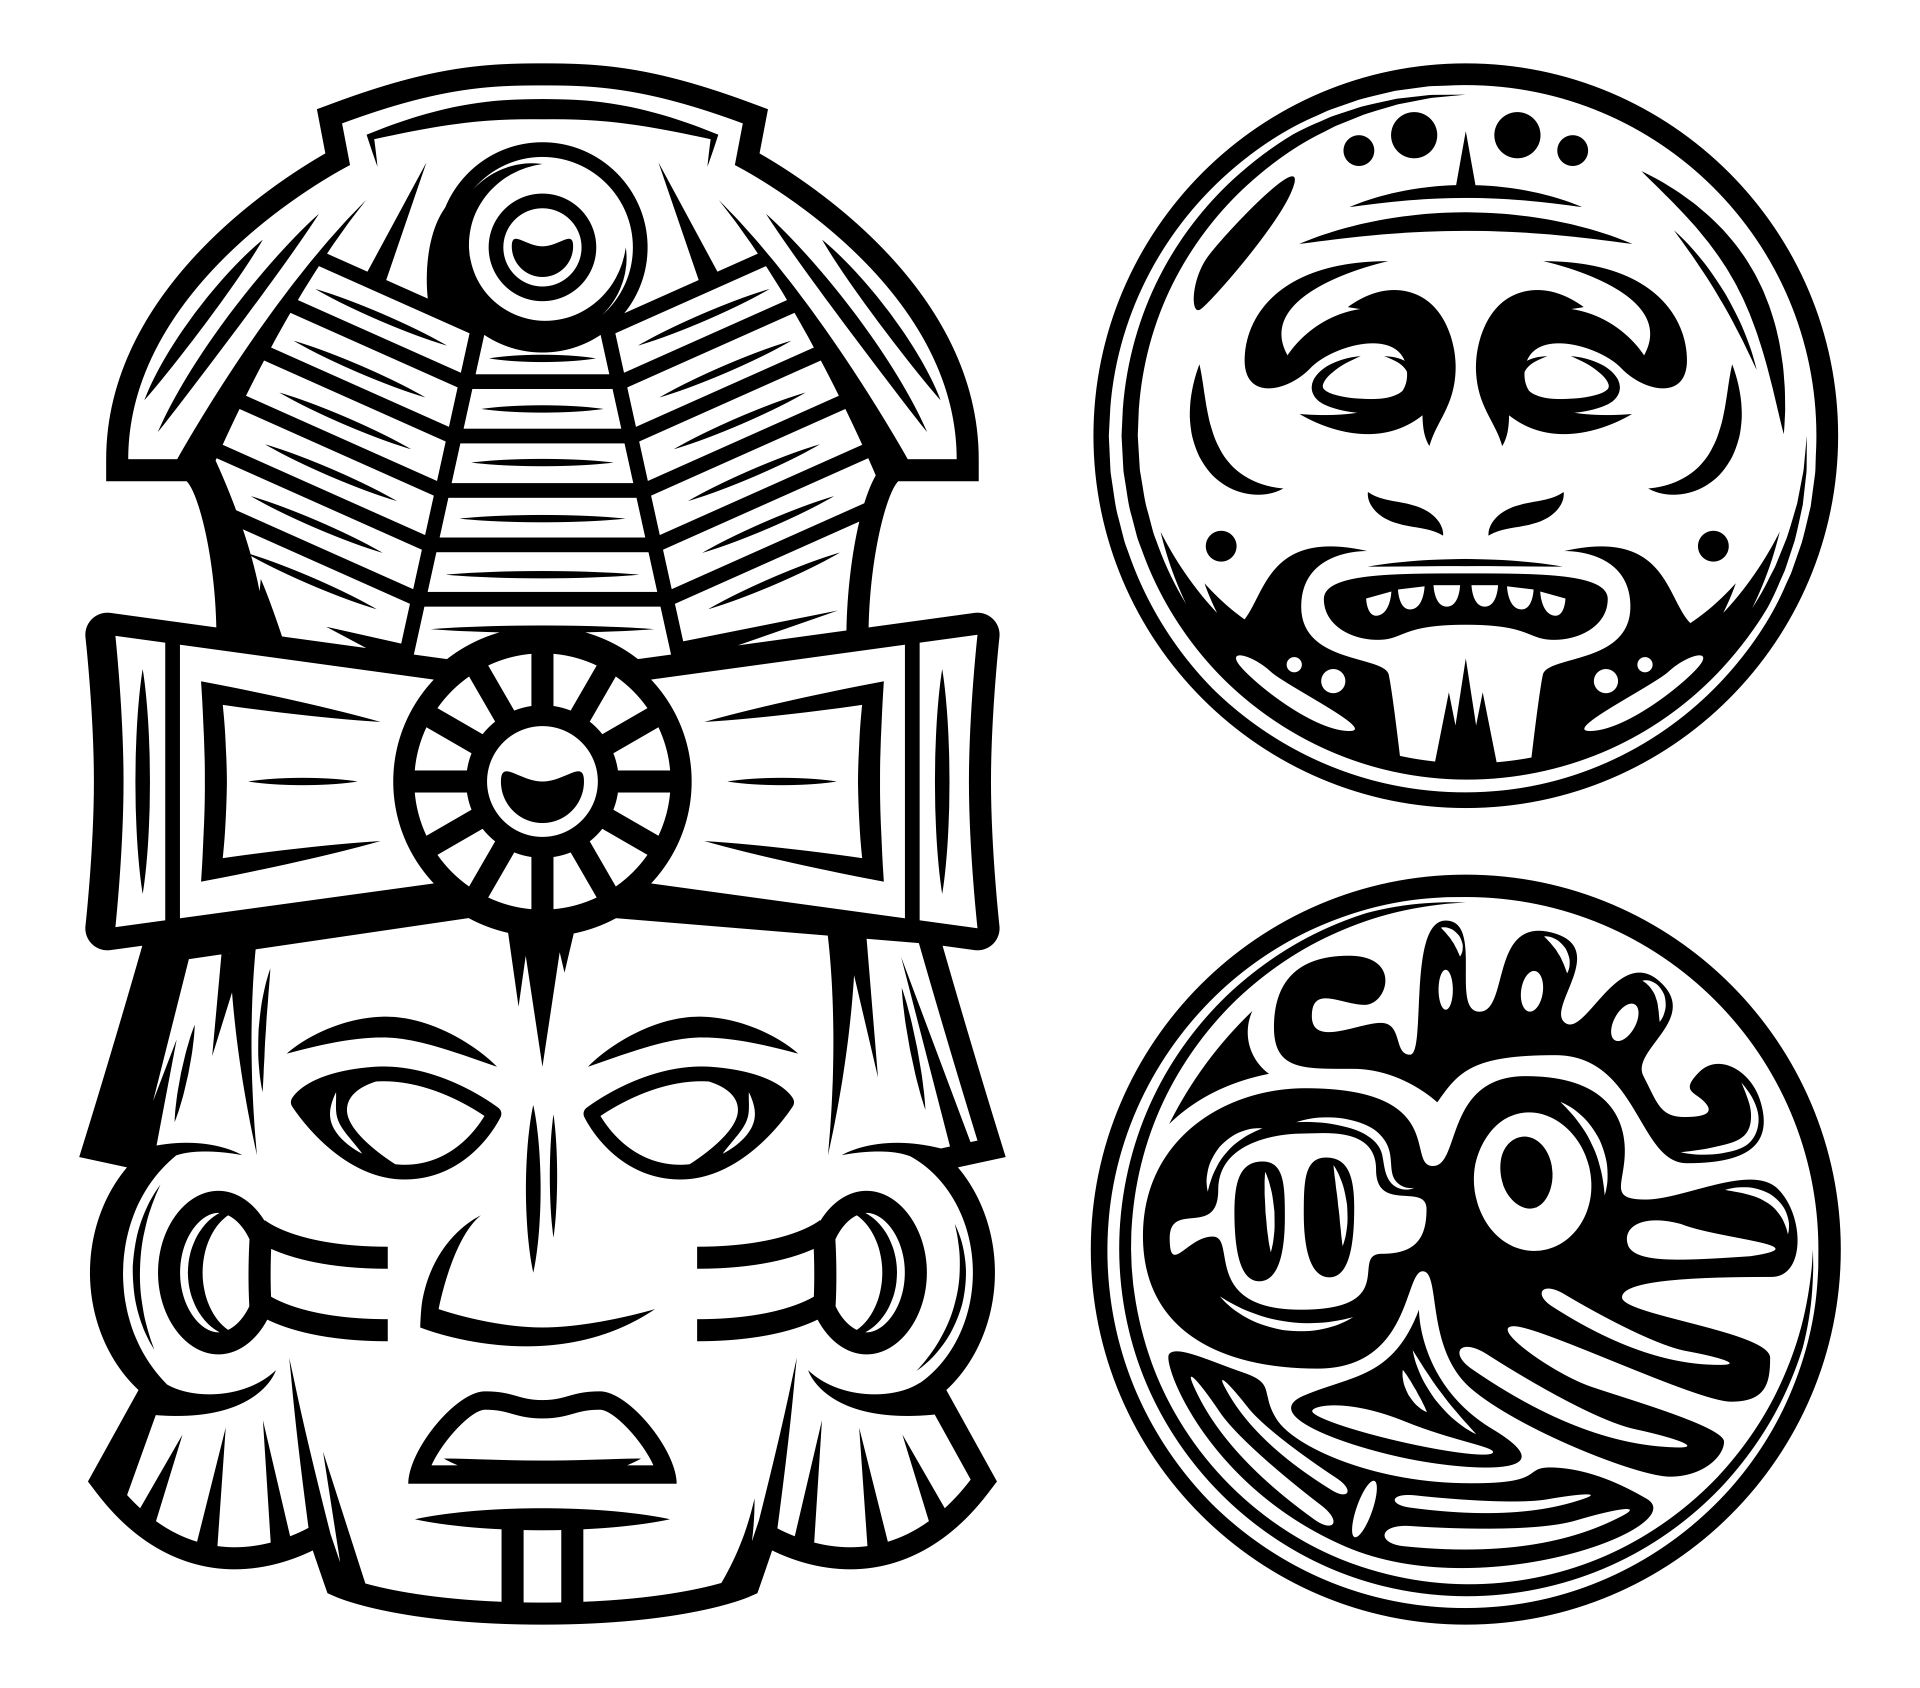 7 Best Images of Printable Totem Pole Templates Totem Poles Printable